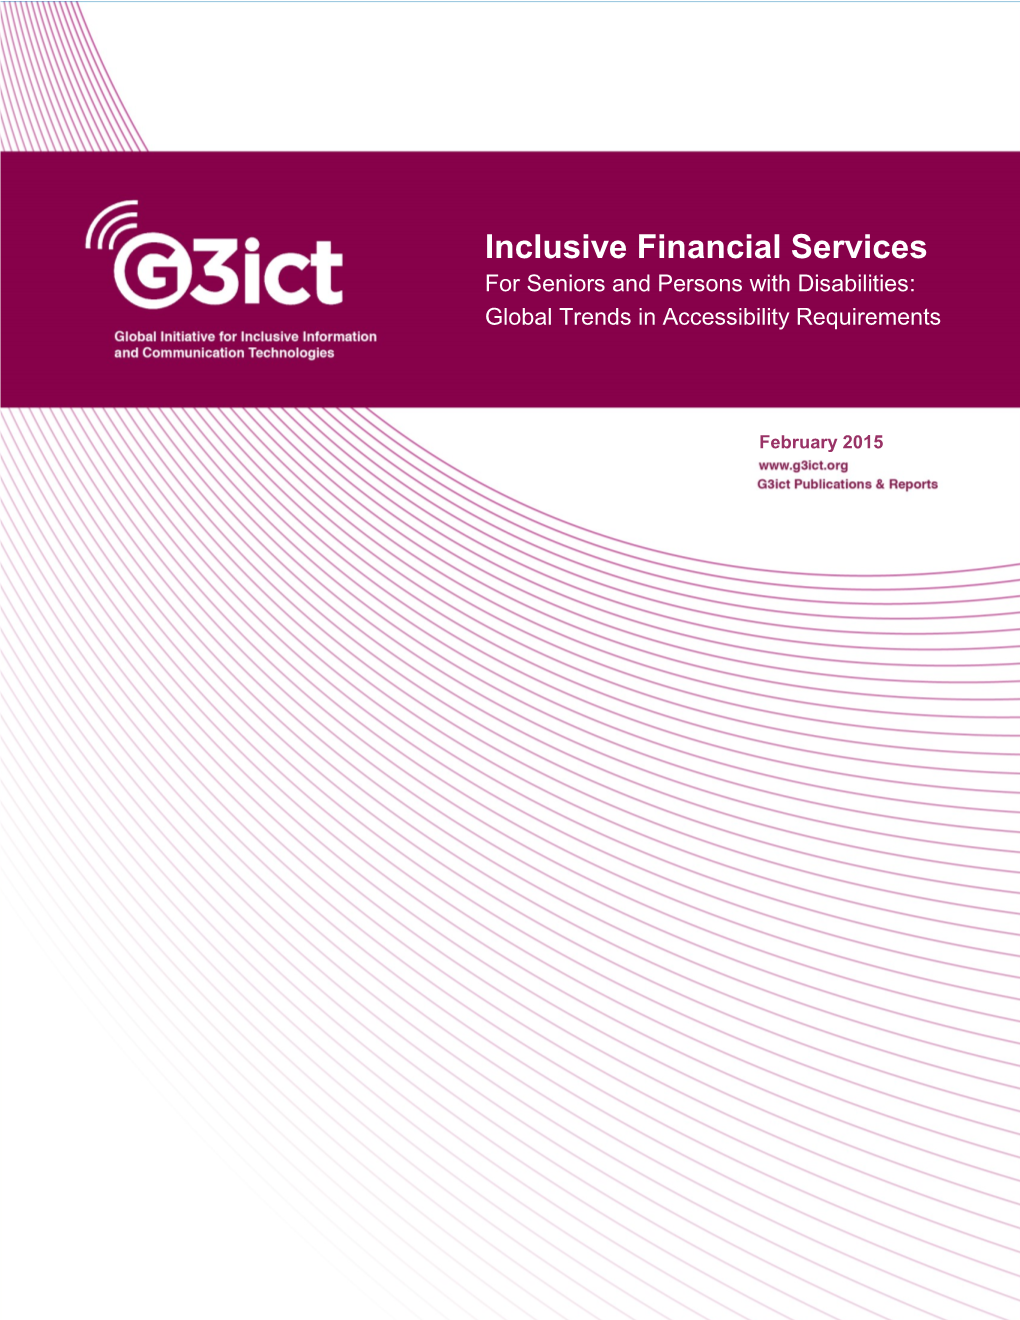 Inclusive Financial Services for Seniors and Persons with Disabilities: Global Trends in Accessibility Requirements